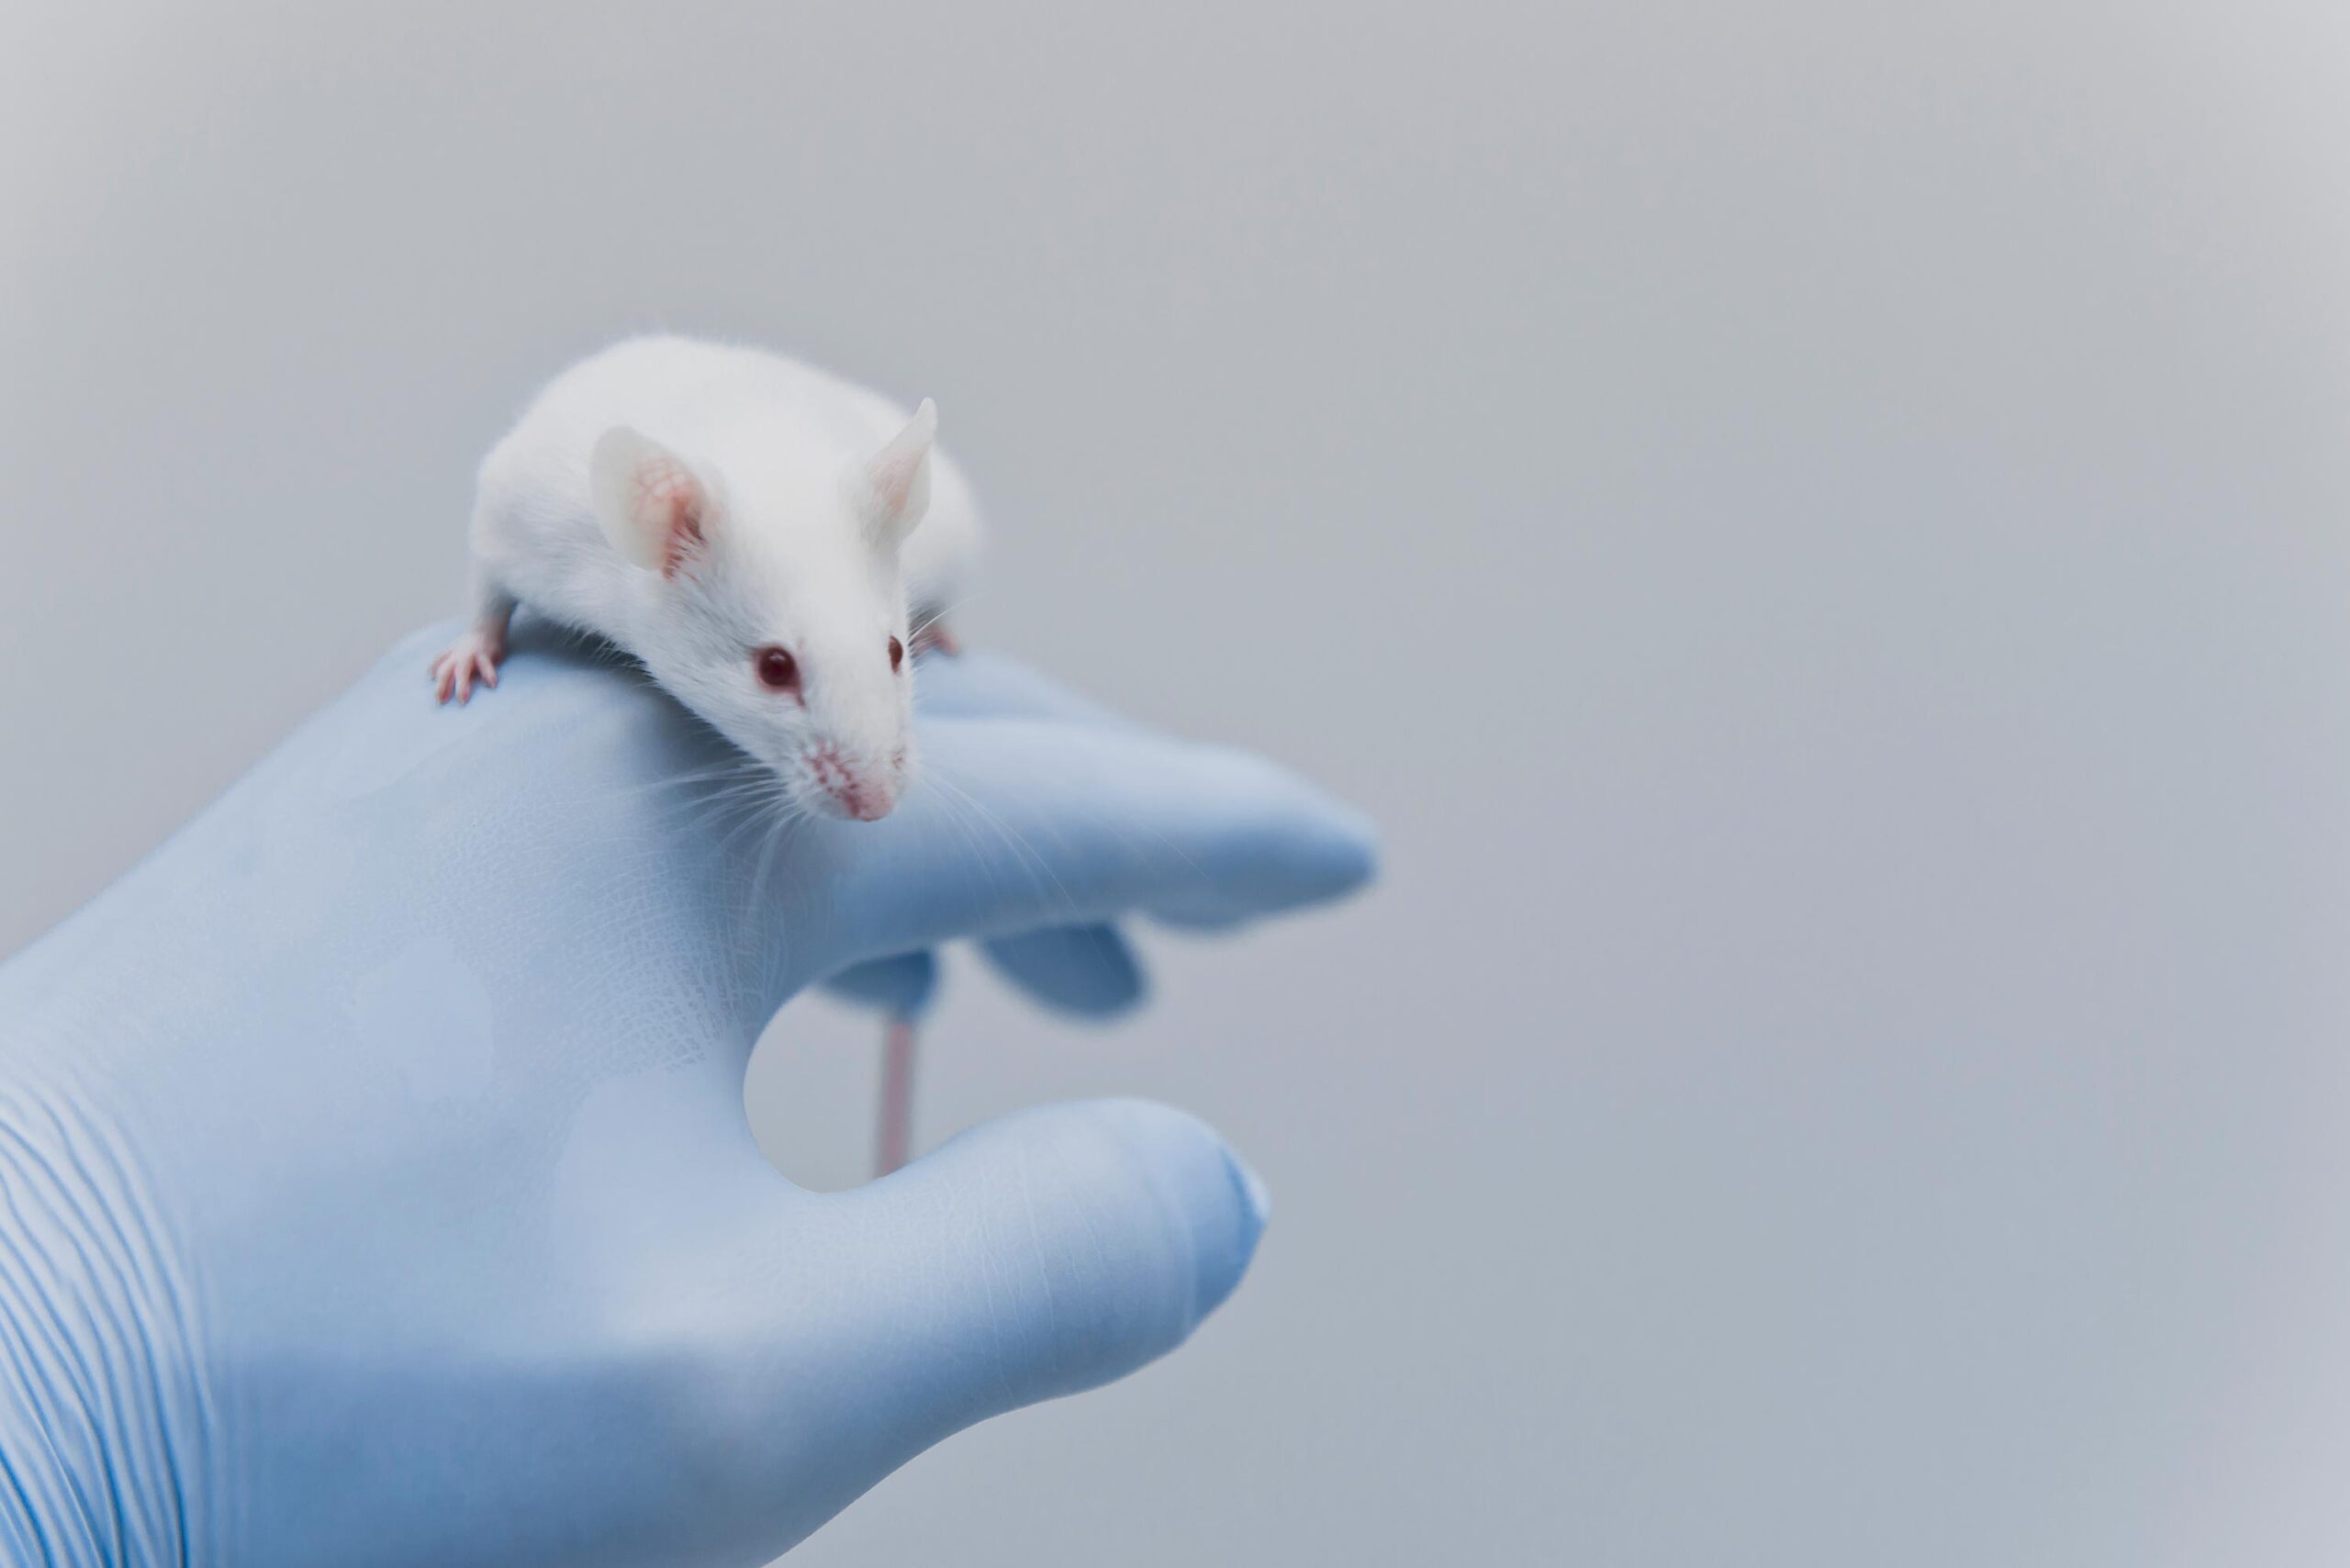 find your ideal mouse identification methods at Somark